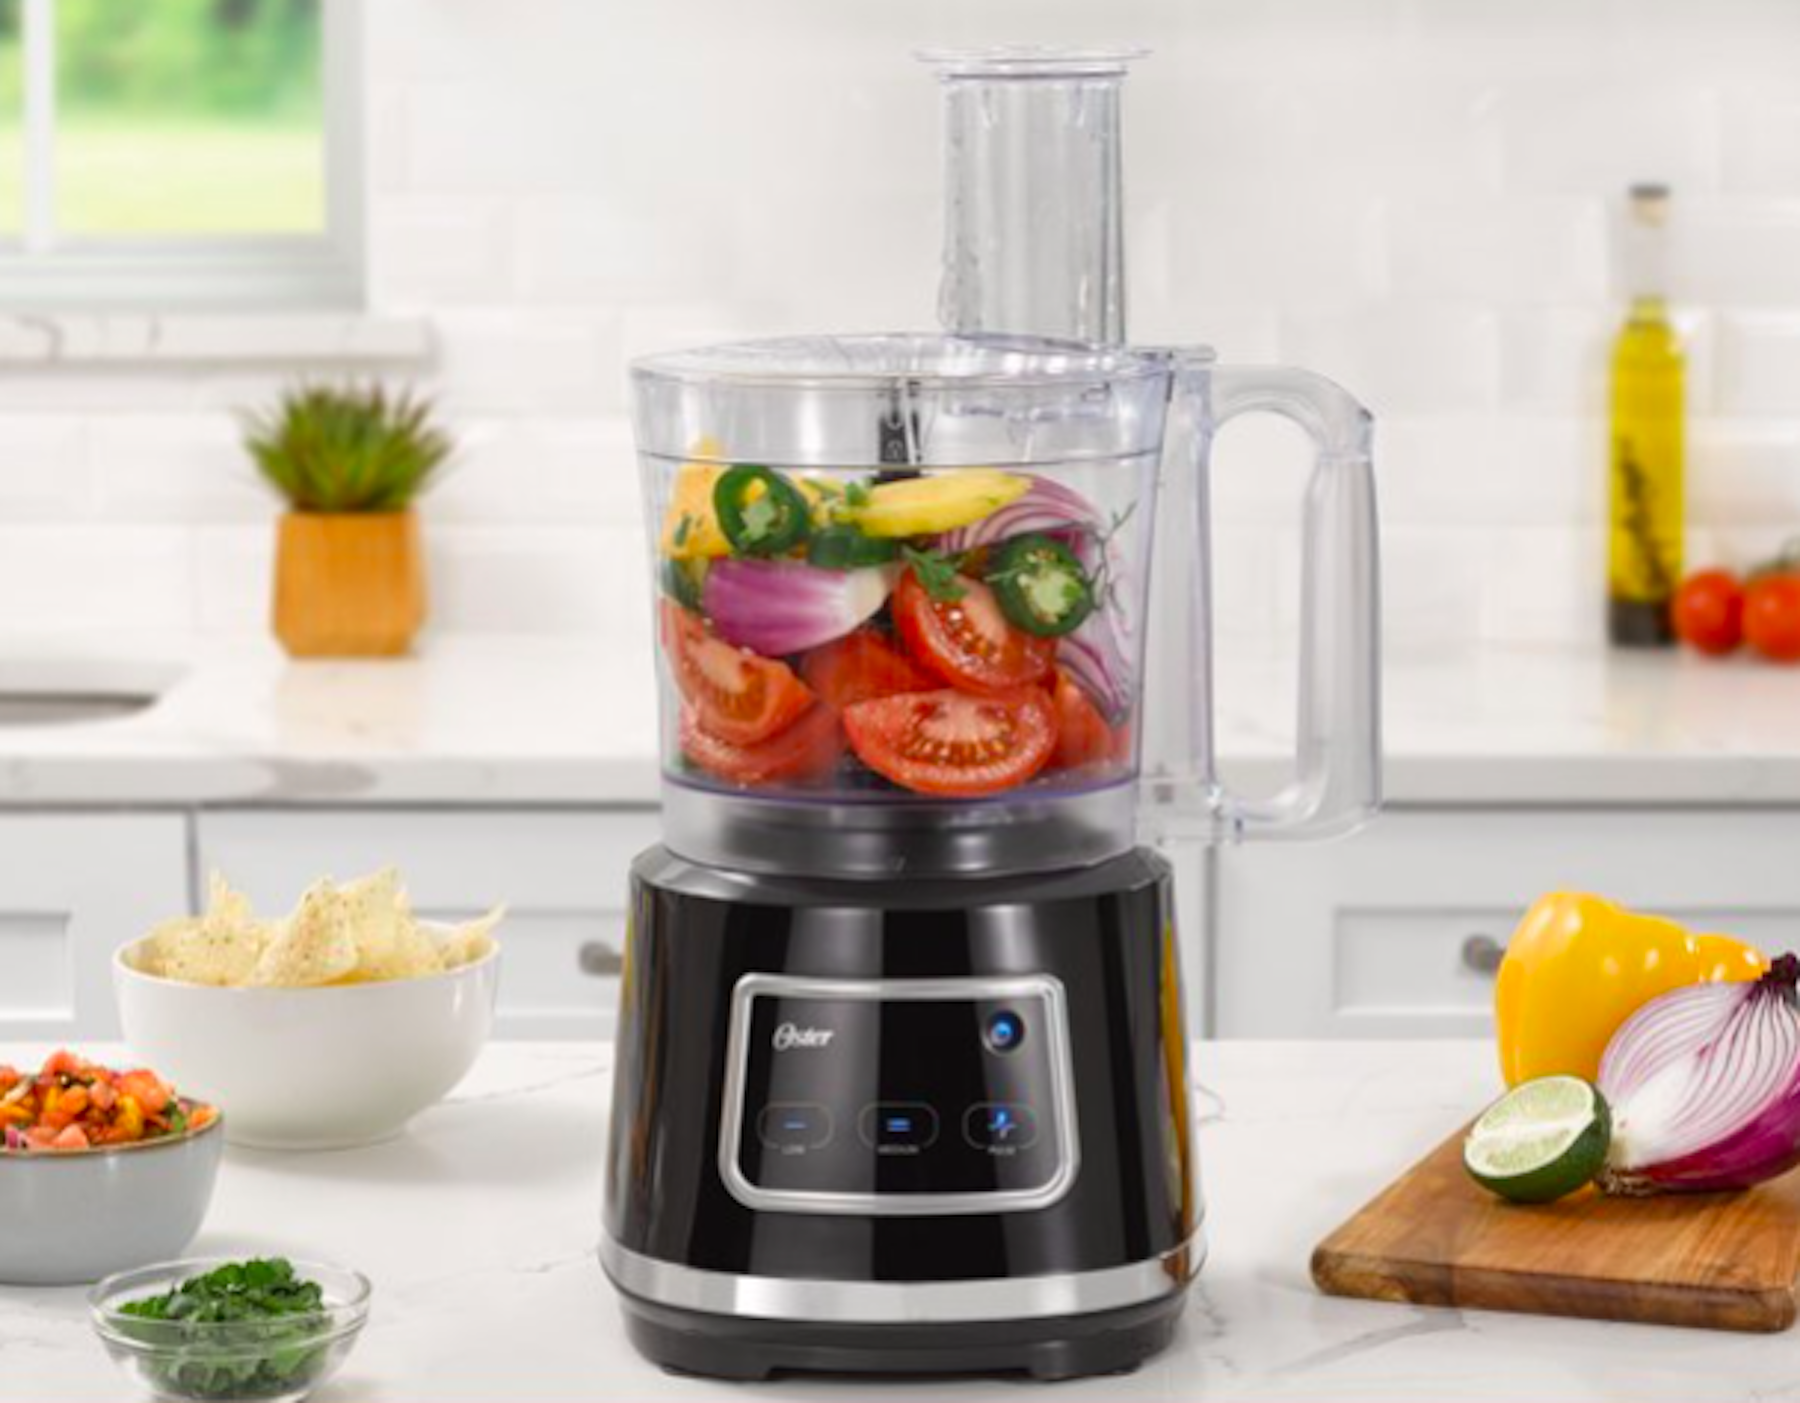 The Best Food Processors For 2022 - Dishcrawl